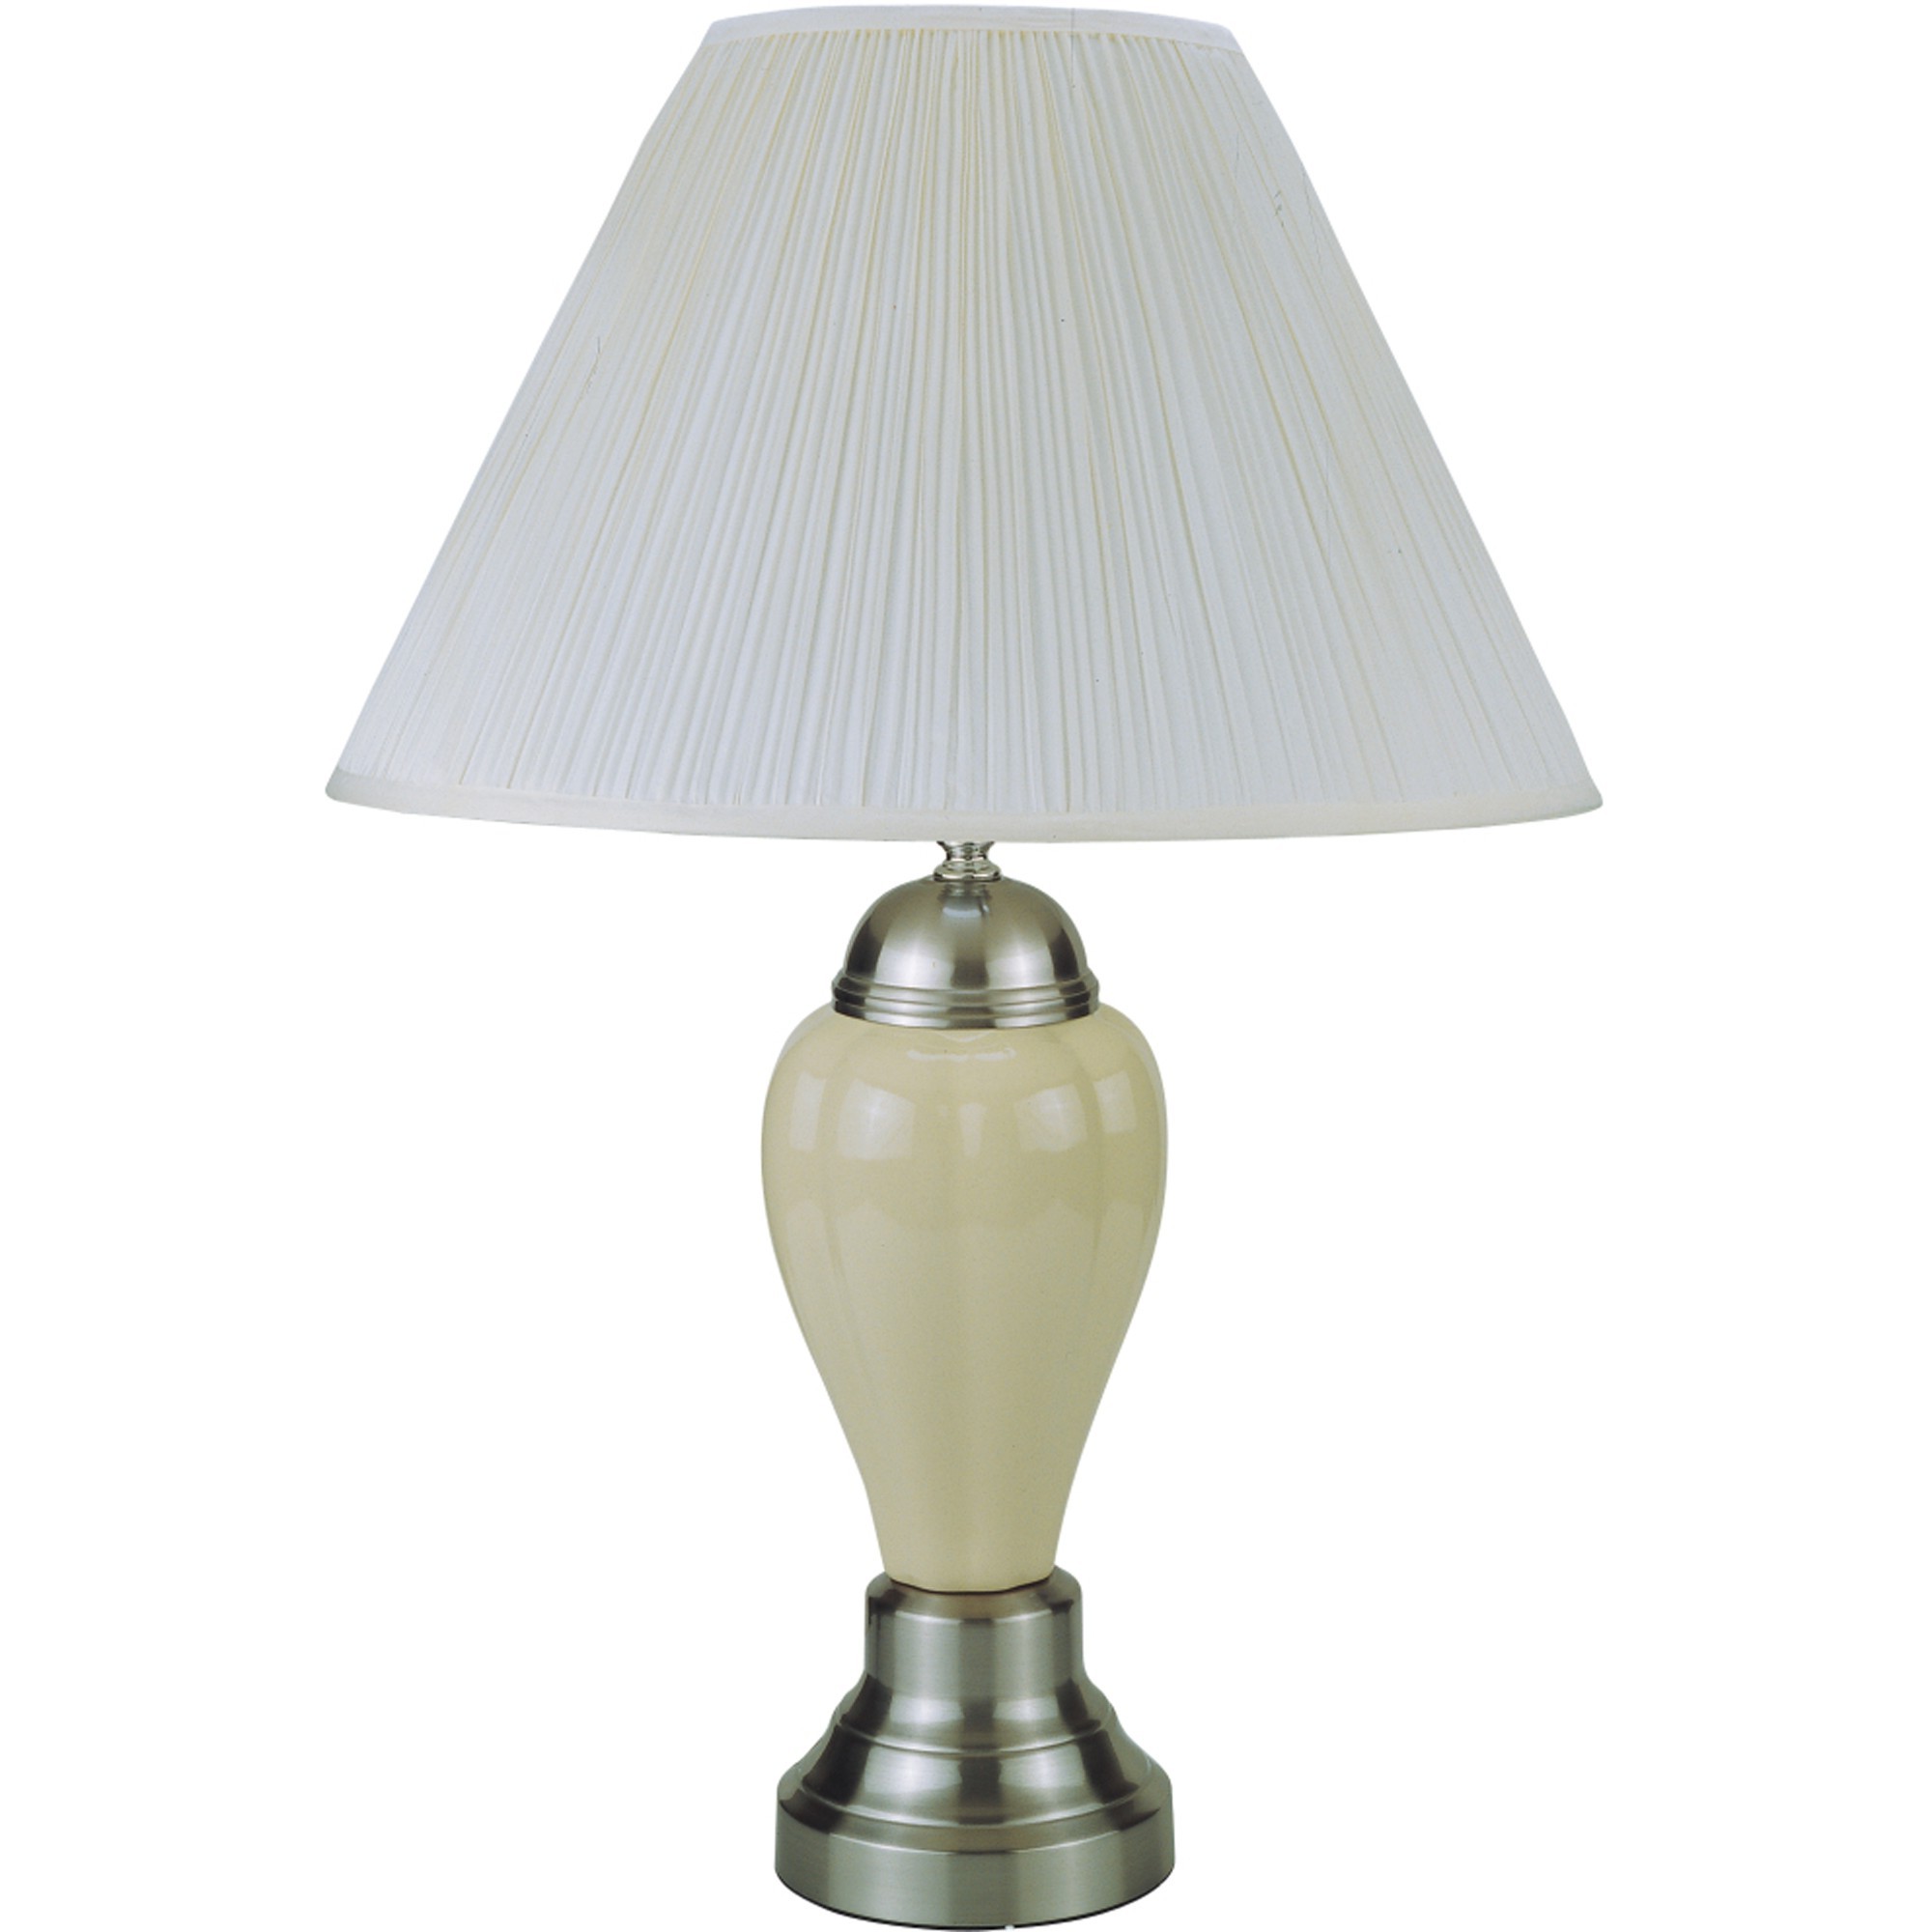 27" Silver Ceramic Bedside Table Lamp With White Shade-468531-1